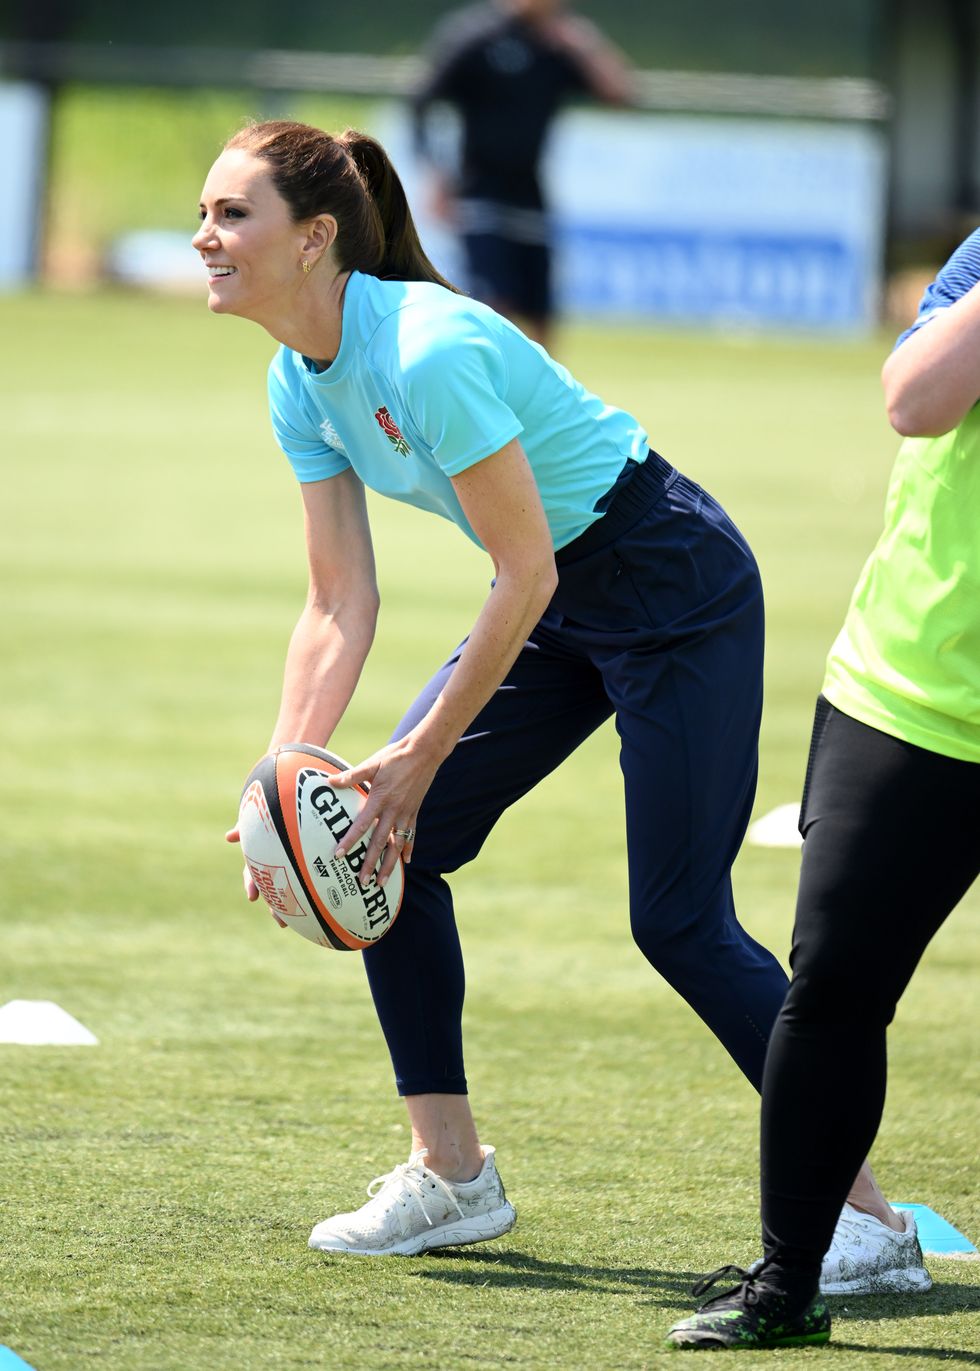 Kate Middleton Shows Off Her Sporty Side in Blue Top and Trousers